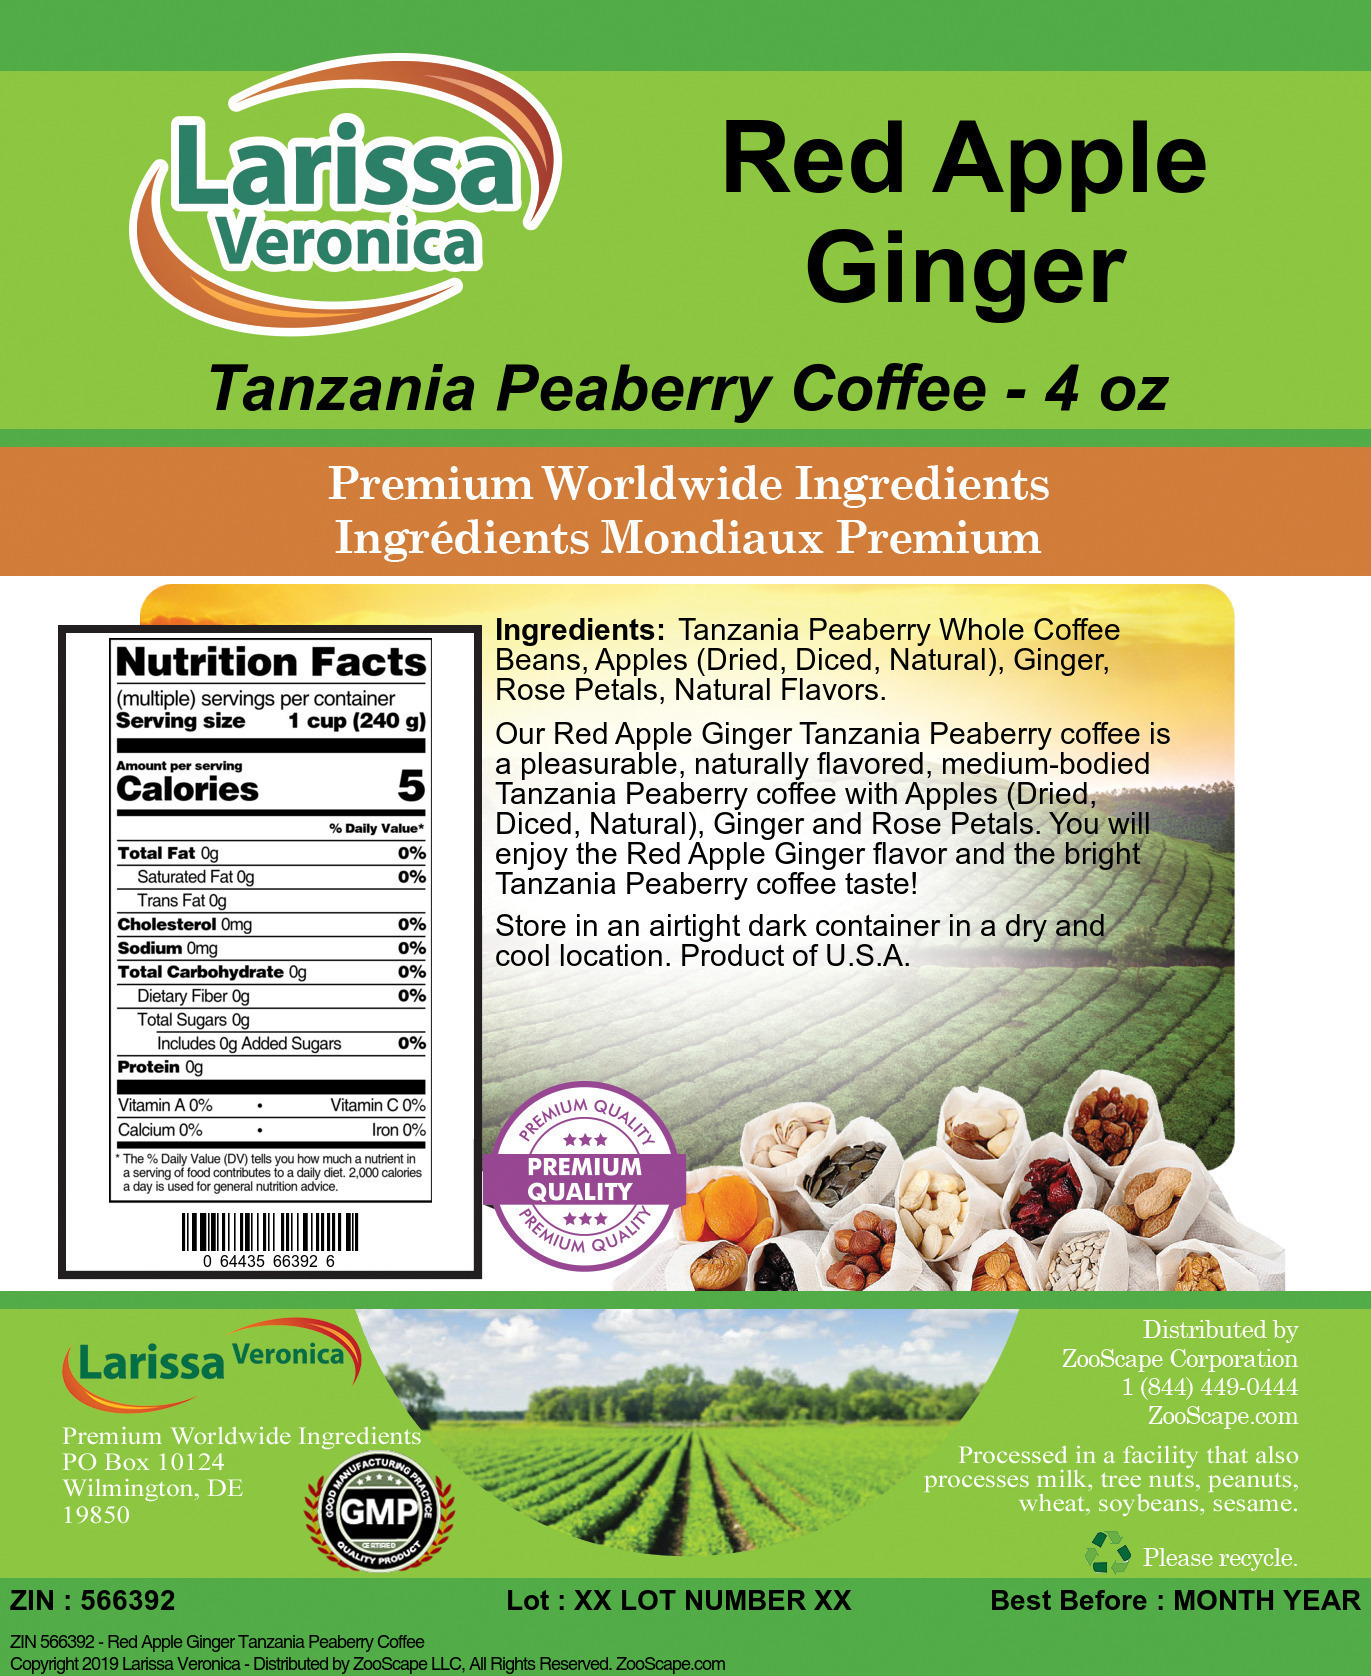 Red Apple Ginger Tanzania Peaberry Coffee - Label